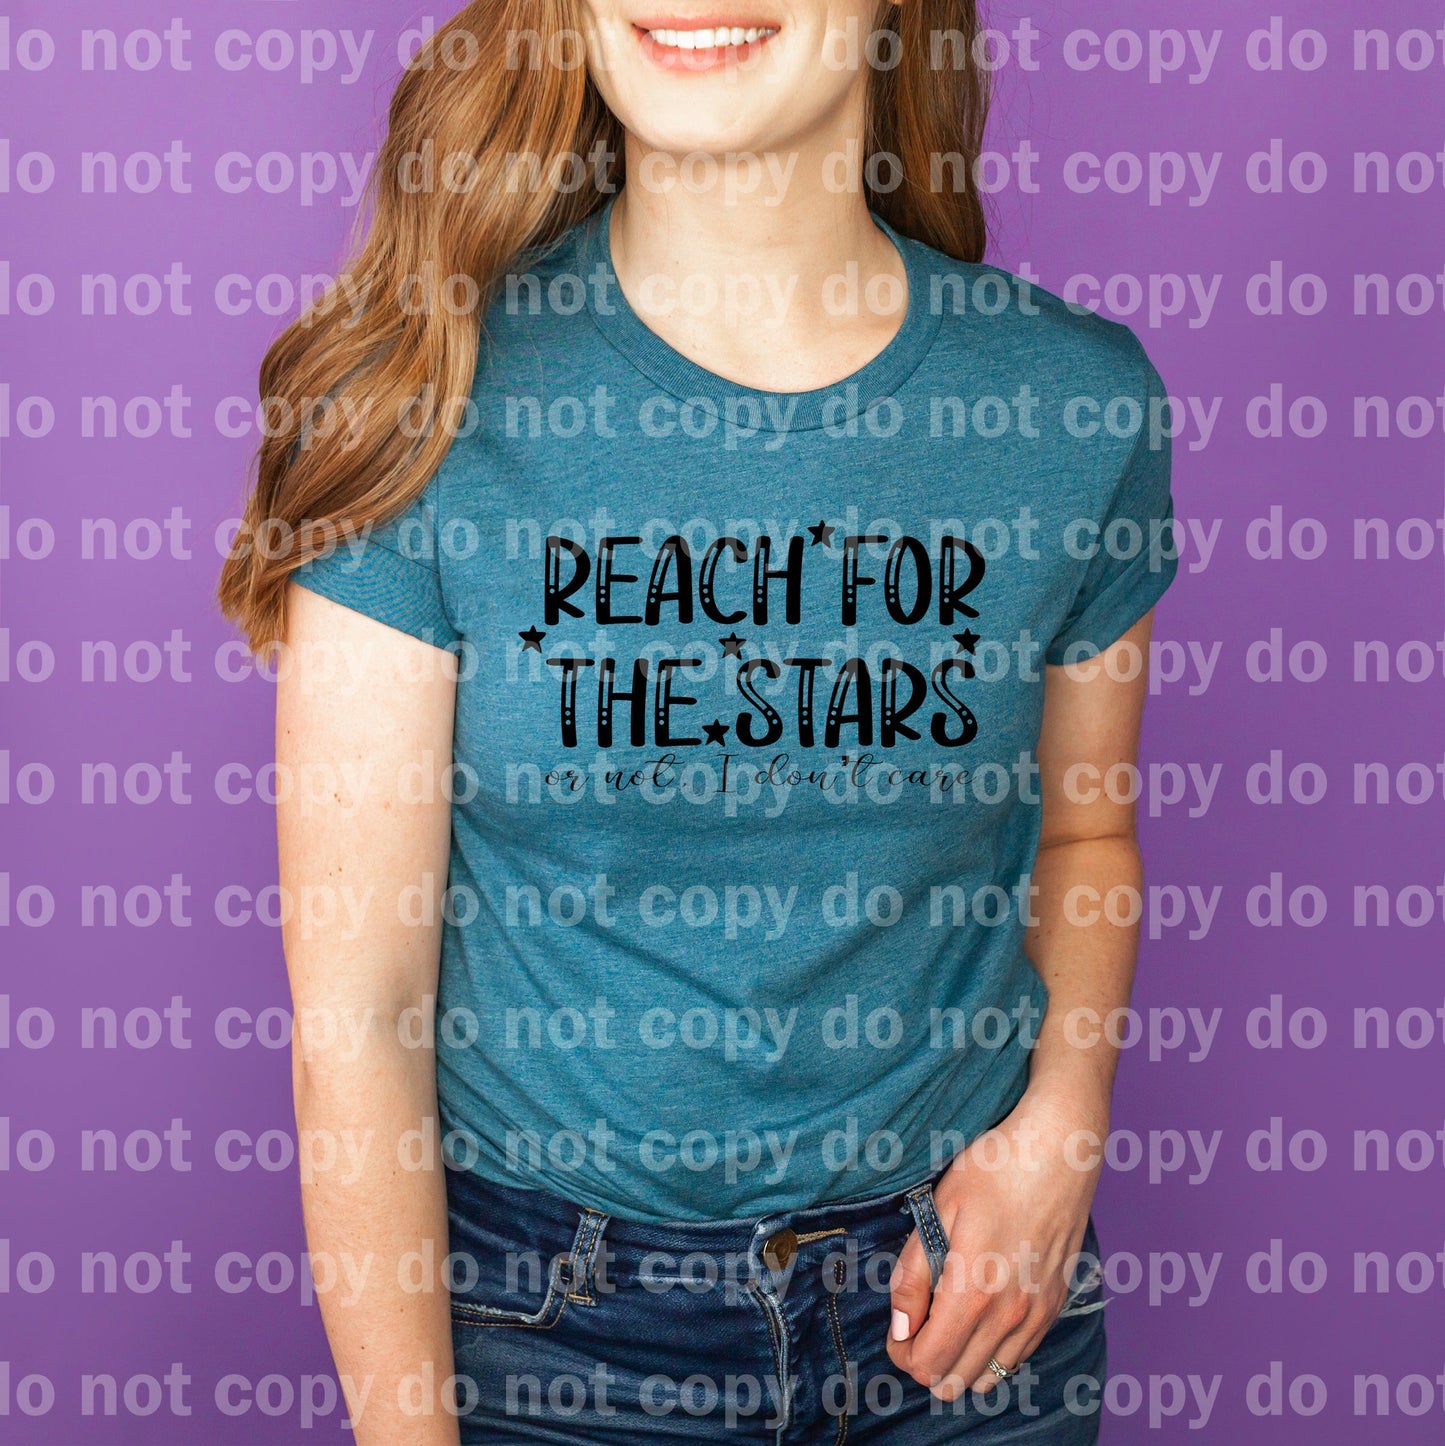 Reach For The Stars Or Not I Don't Care Black/White Dream Print or Sublimation Print